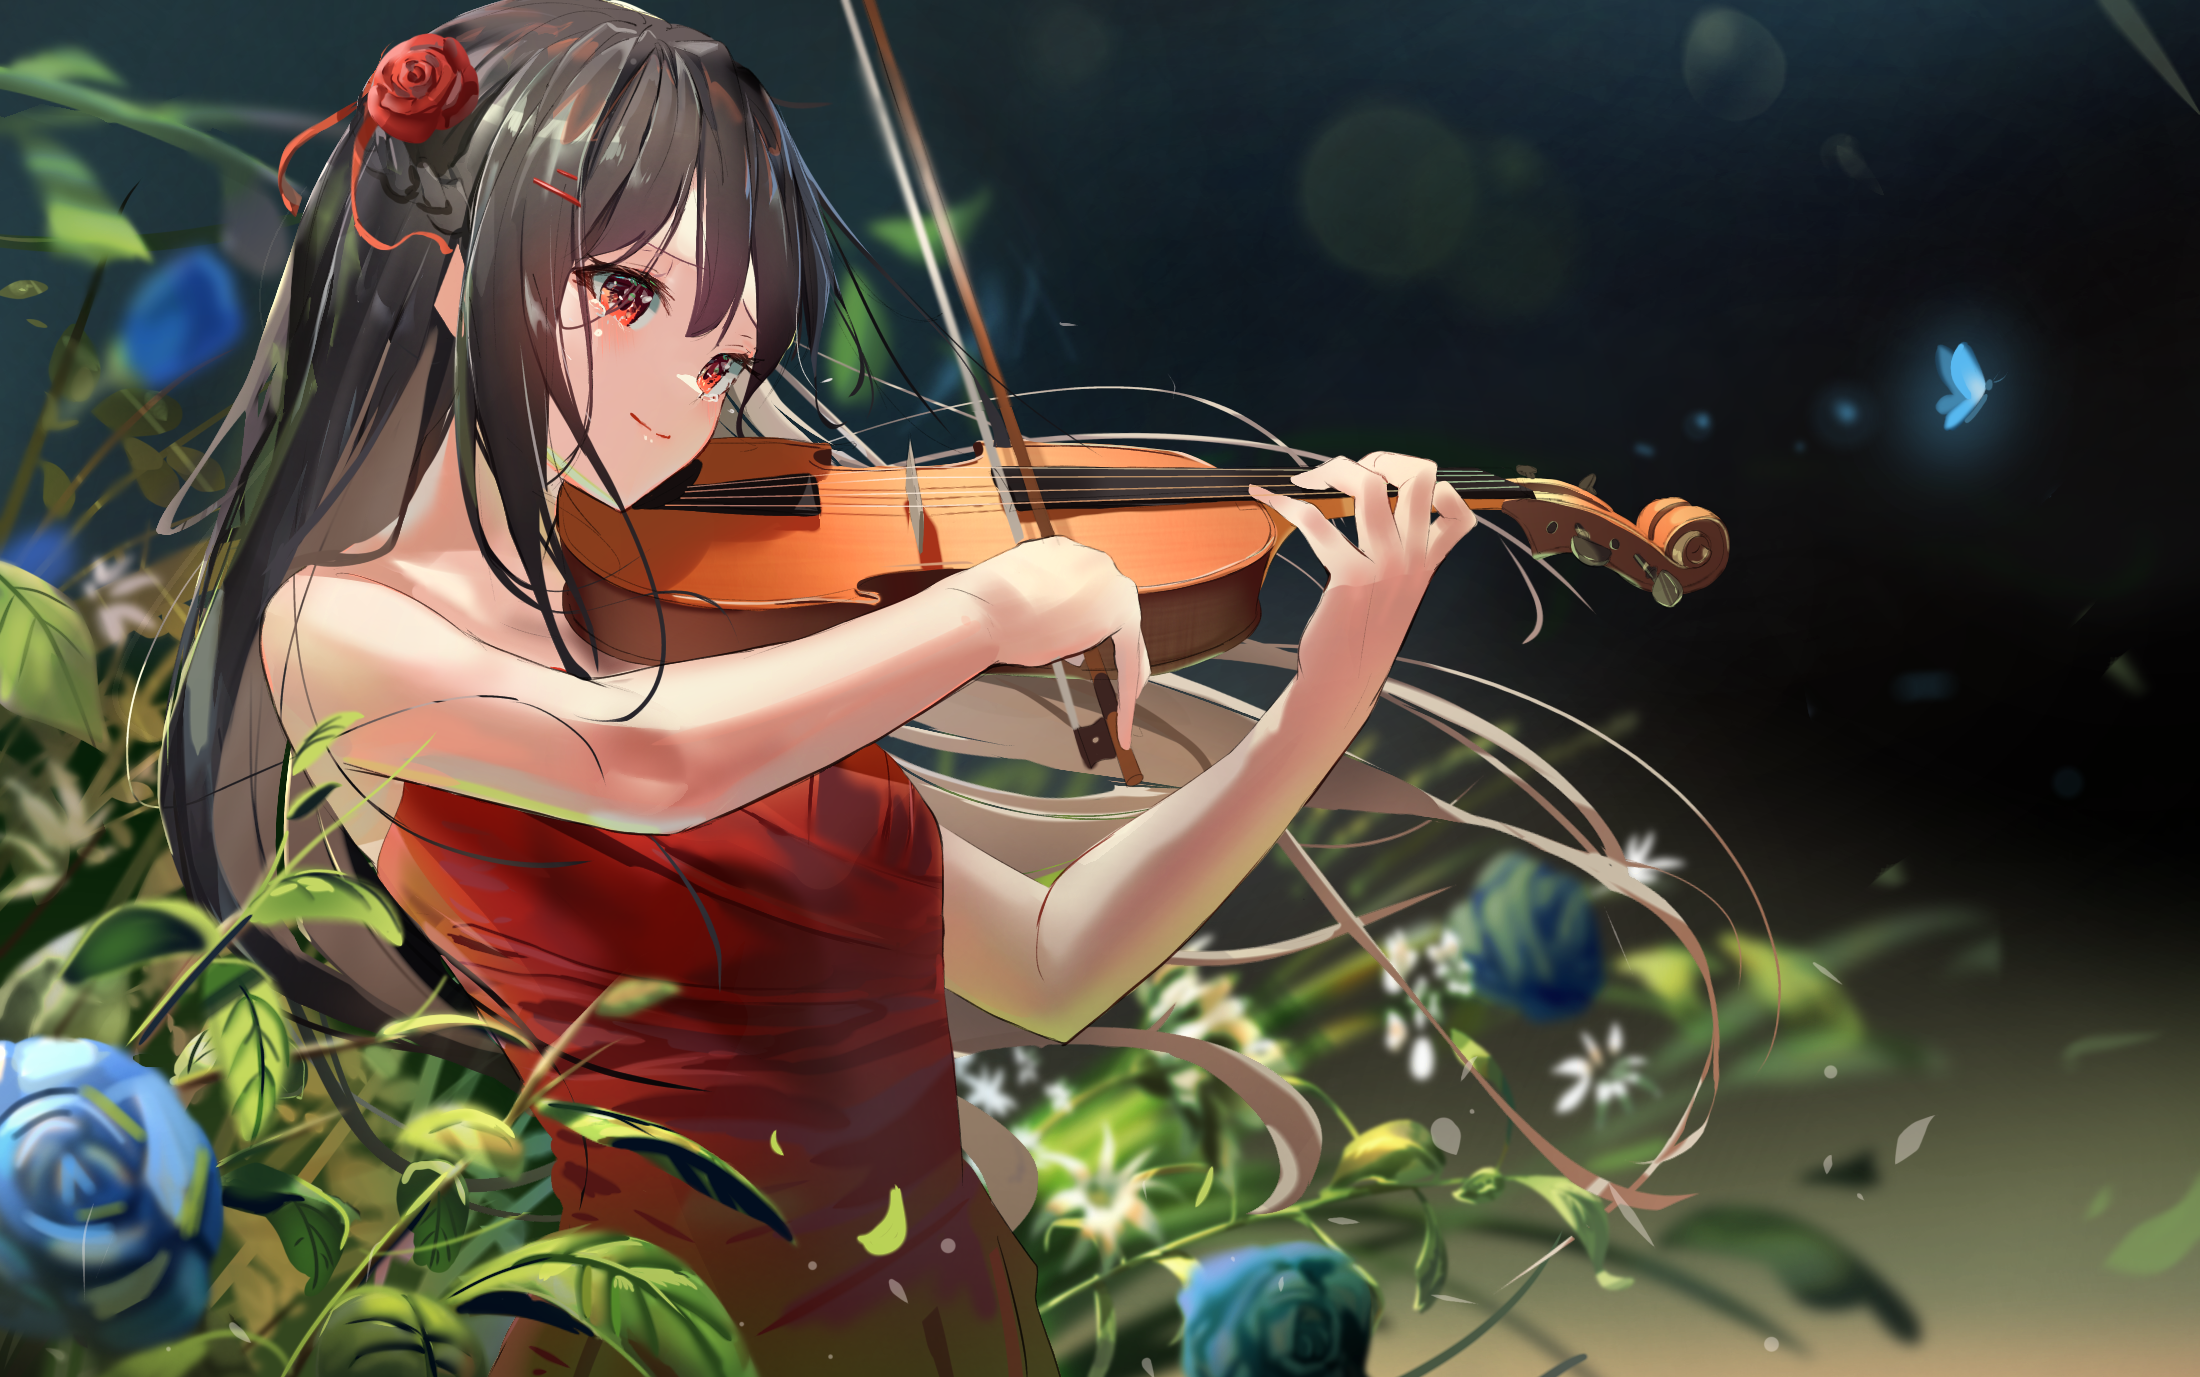 Anime girl in a red dress playing the violin HD Wallpaper